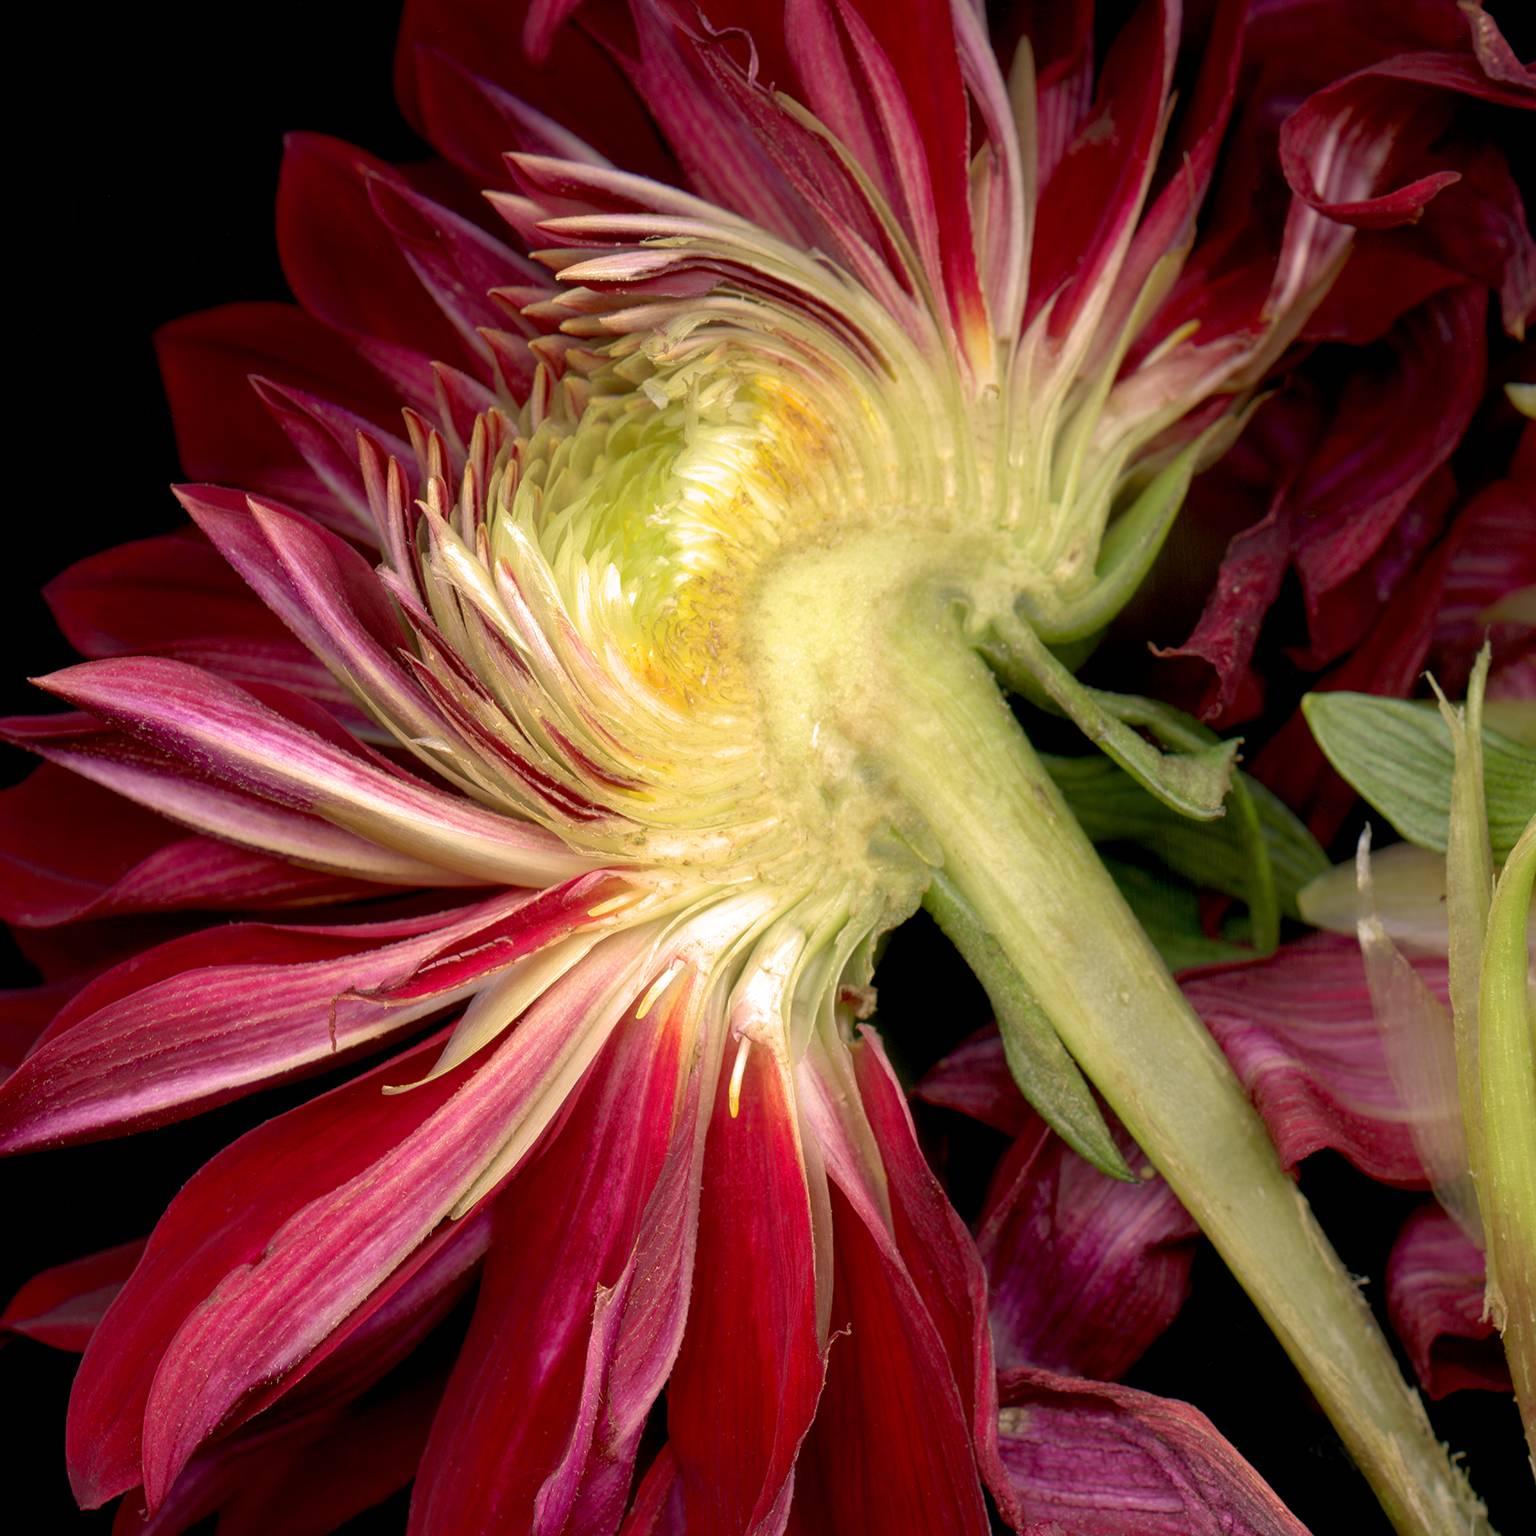 Separation Anxiety - a split red flower - Photograph by Debb VanDelinder